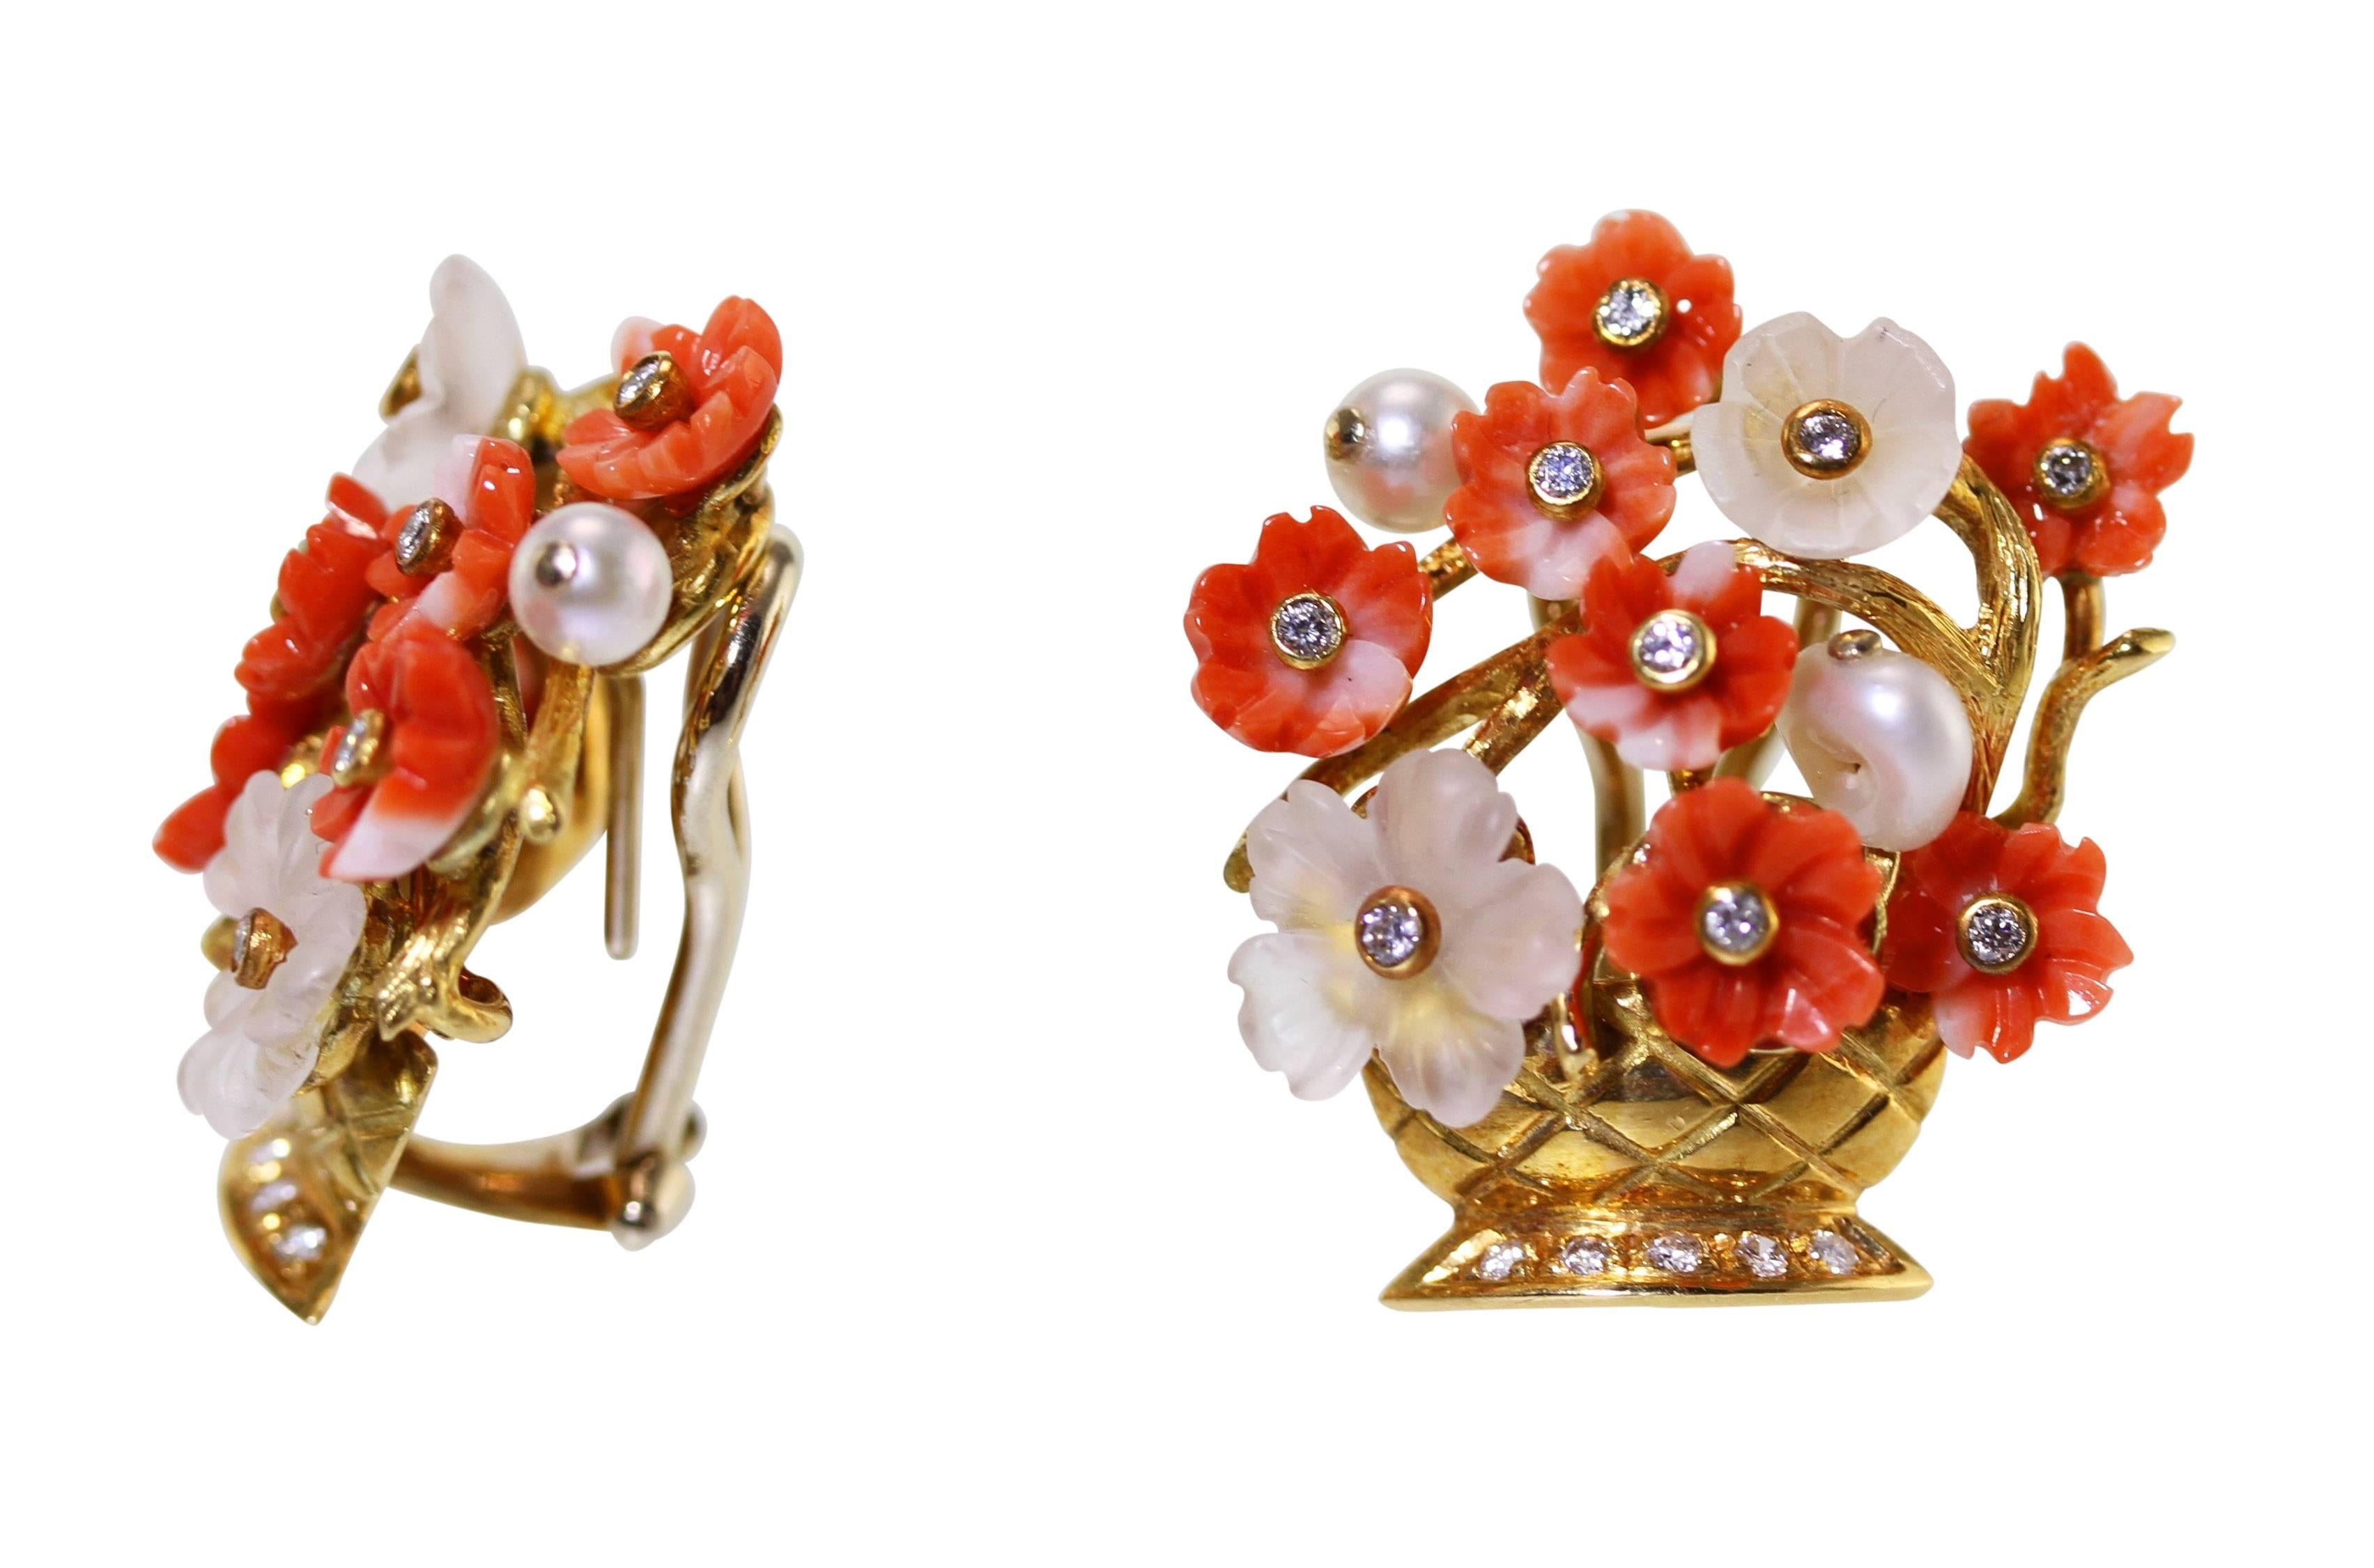 Pair of 18 Karat Gold, Coral, Quartz, Cultured Pearl and Diamond Flower Basket Earclips
• Stamped 750, with Italian assay marks and indistinct signature
• 14 petals of carved coral, 4 petals of carved frosted quartz, 4 beads of cultured pearls
• 18